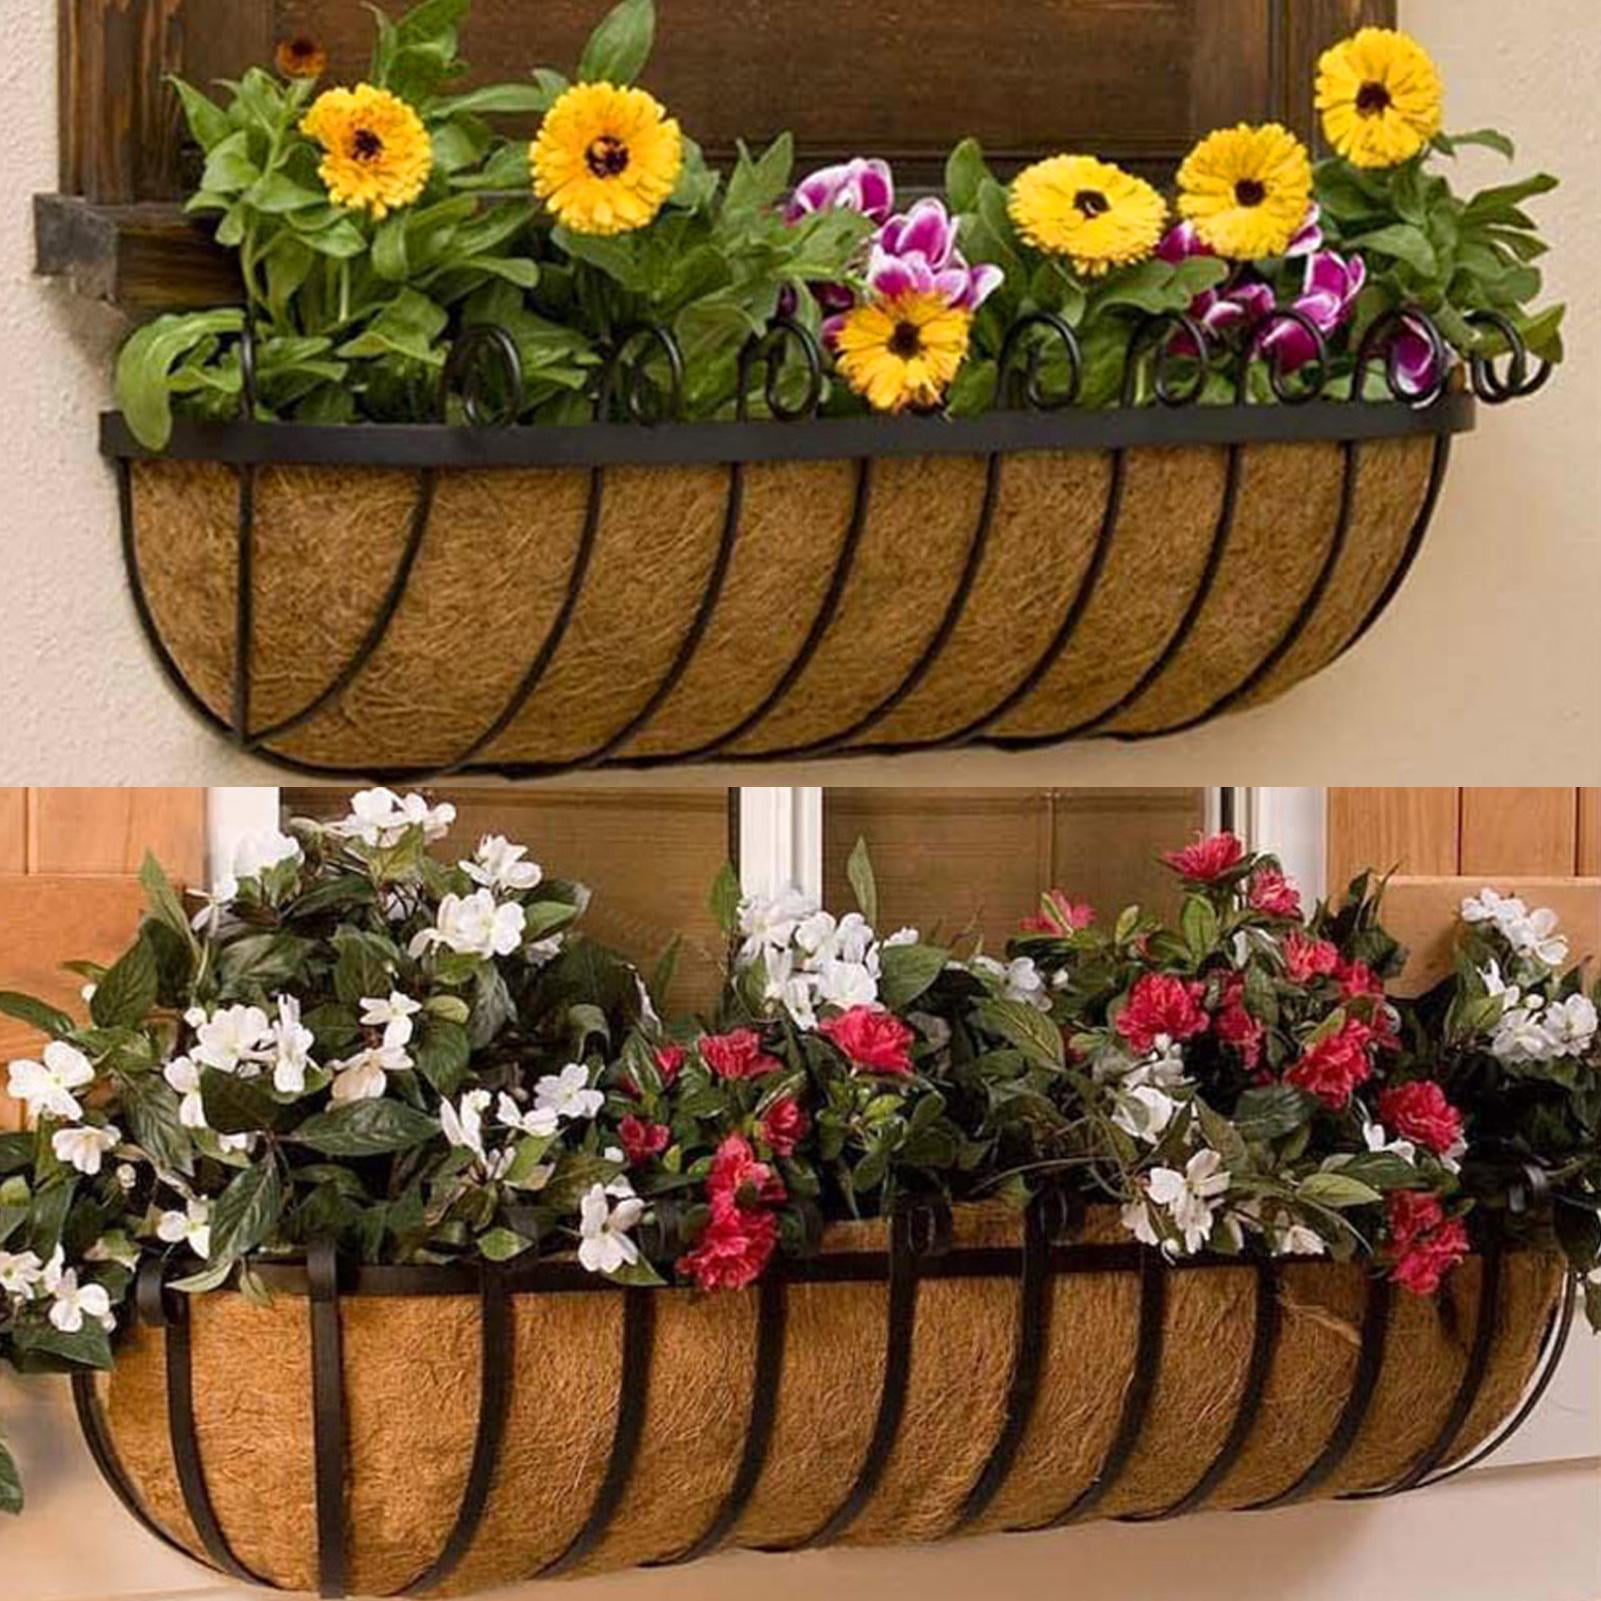 Trough Coco Liners for Plant Hanging Basket 24Inch Garden Flower Vegetables Pot Fence Flower Baskets 1Pack Coco Fiber Replacement Liner 1 Pack